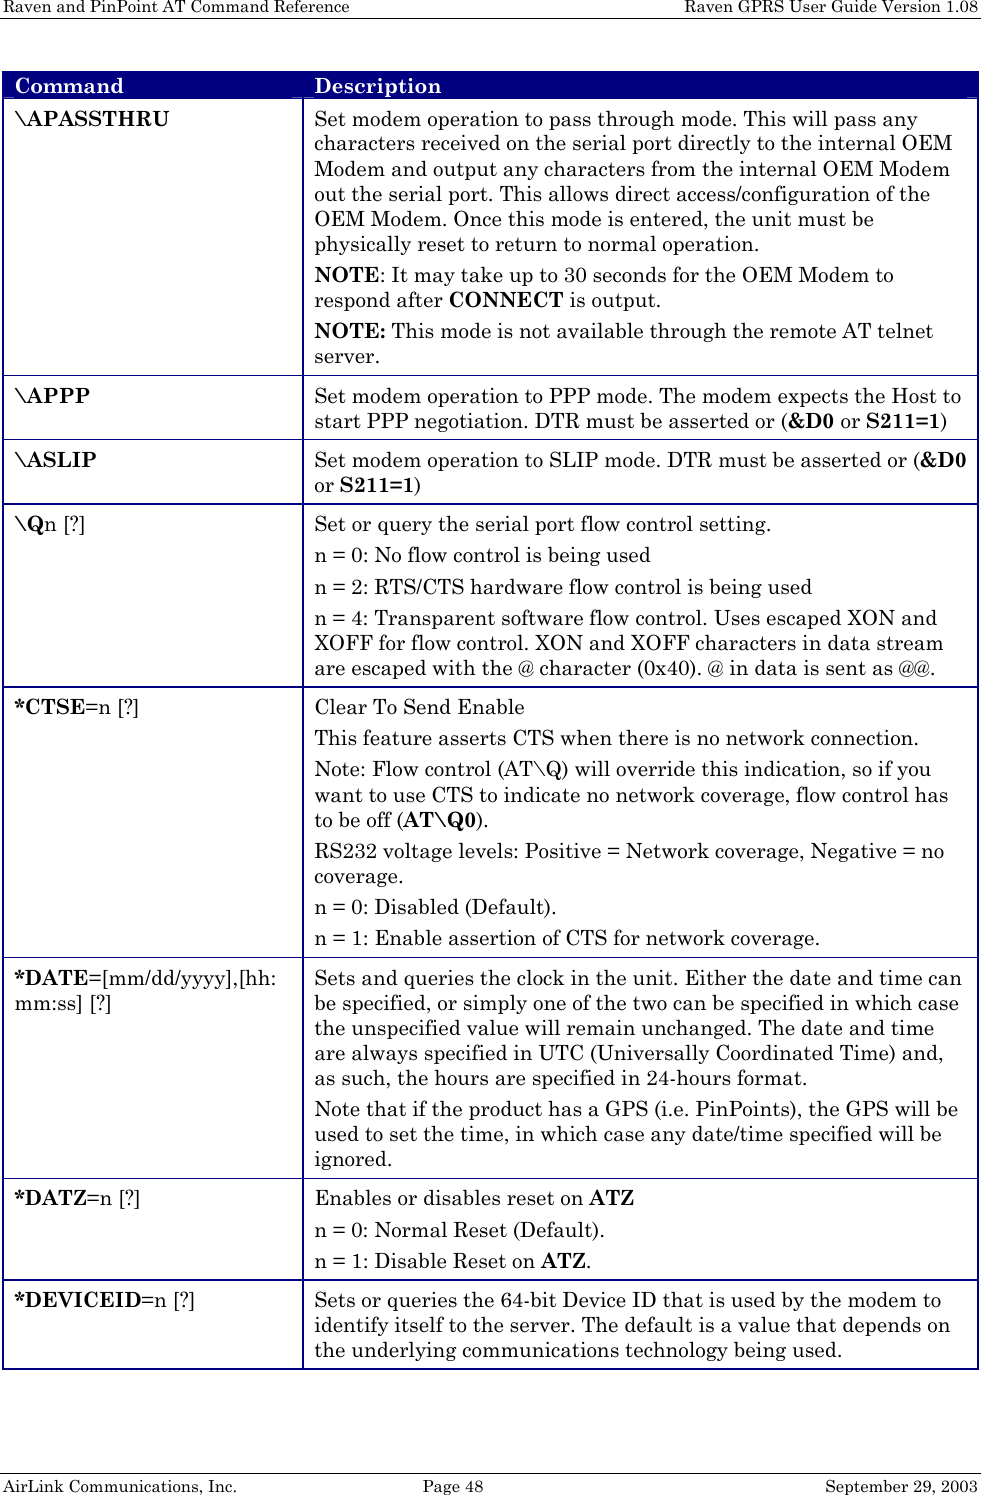 Raven and PinPoint AT Command Reference    Raven GPRS User Guide Version 1.08 AirLink Communications, Inc.  Page 48  September 29, 2003 Command Description \APASSTHRU Set modem operation to pass through mode. This will pass any characters received on the serial port directly to the internal OEM Modem and output any characters from the internal OEM Modem out the serial port. This allows direct access/configuration of the OEM Modem. Once this mode is entered, the unit must be physically reset to return to normal operation. NOTE: It may take up to 30 seconds for the OEM Modem to respond after CONNECT is output. NOTE: This mode is not available through the remote AT telnet server. \APPP Set modem operation to PPP mode. The modem expects the Host to start PPP negotiation. DTR must be asserted or (&amp;D0 or S211=1) \ASLIP Set modem operation to SLIP mode. DTR must be asserted or (&amp;D0 or S211=1) \Qn [?] Set or query the serial port flow control setting. n = 0: No flow control is being used n = 2: RTS/CTS hardware flow control is being used n = 4: Transparent software flow control. Uses escaped XON and XOFF for flow control. XON and XOFF characters in data stream are escaped with the @ character (0x40). @ in data is sent as @@. *CTSE=n [?] Clear To Send Enable This feature asserts CTS when there is no network connection. Note: Flow control (AT\Q) will override this indication, so if you want to use CTS to indicate no network coverage, flow control has to be off (AT\Q0). RS232 voltage levels: Positive = Network coverage, Negative = no coverage. n = 0: Disabled (Default). n = 1: Enable assertion of CTS for network coverage. *DATE=[mm/dd/yyyy],[hh:mm:ss] [?] Sets and queries the clock in the unit. Either the date and time can be specified, or simply one of the two can be specified in which case the unspecified value will remain unchanged. The date and time are always specified in UTC (Universally Coordinated Time) and, as such, the hours are specified in 24-hours format. Note that if the product has a GPS (i.e. PinPoints), the GPS will be used to set the time, in which case any date/time specified will be ignored. *DATZ=n [?] Enables or disables reset on ATZ n = 0: Normal Reset (Default). n = 1: Disable Reset on ATZ. *DEVICEID=n [?] Sets or queries the 64-bit Device ID that is used by the modem to identify itself to the server. The default is a value that depends on the underlying communications technology being used. 